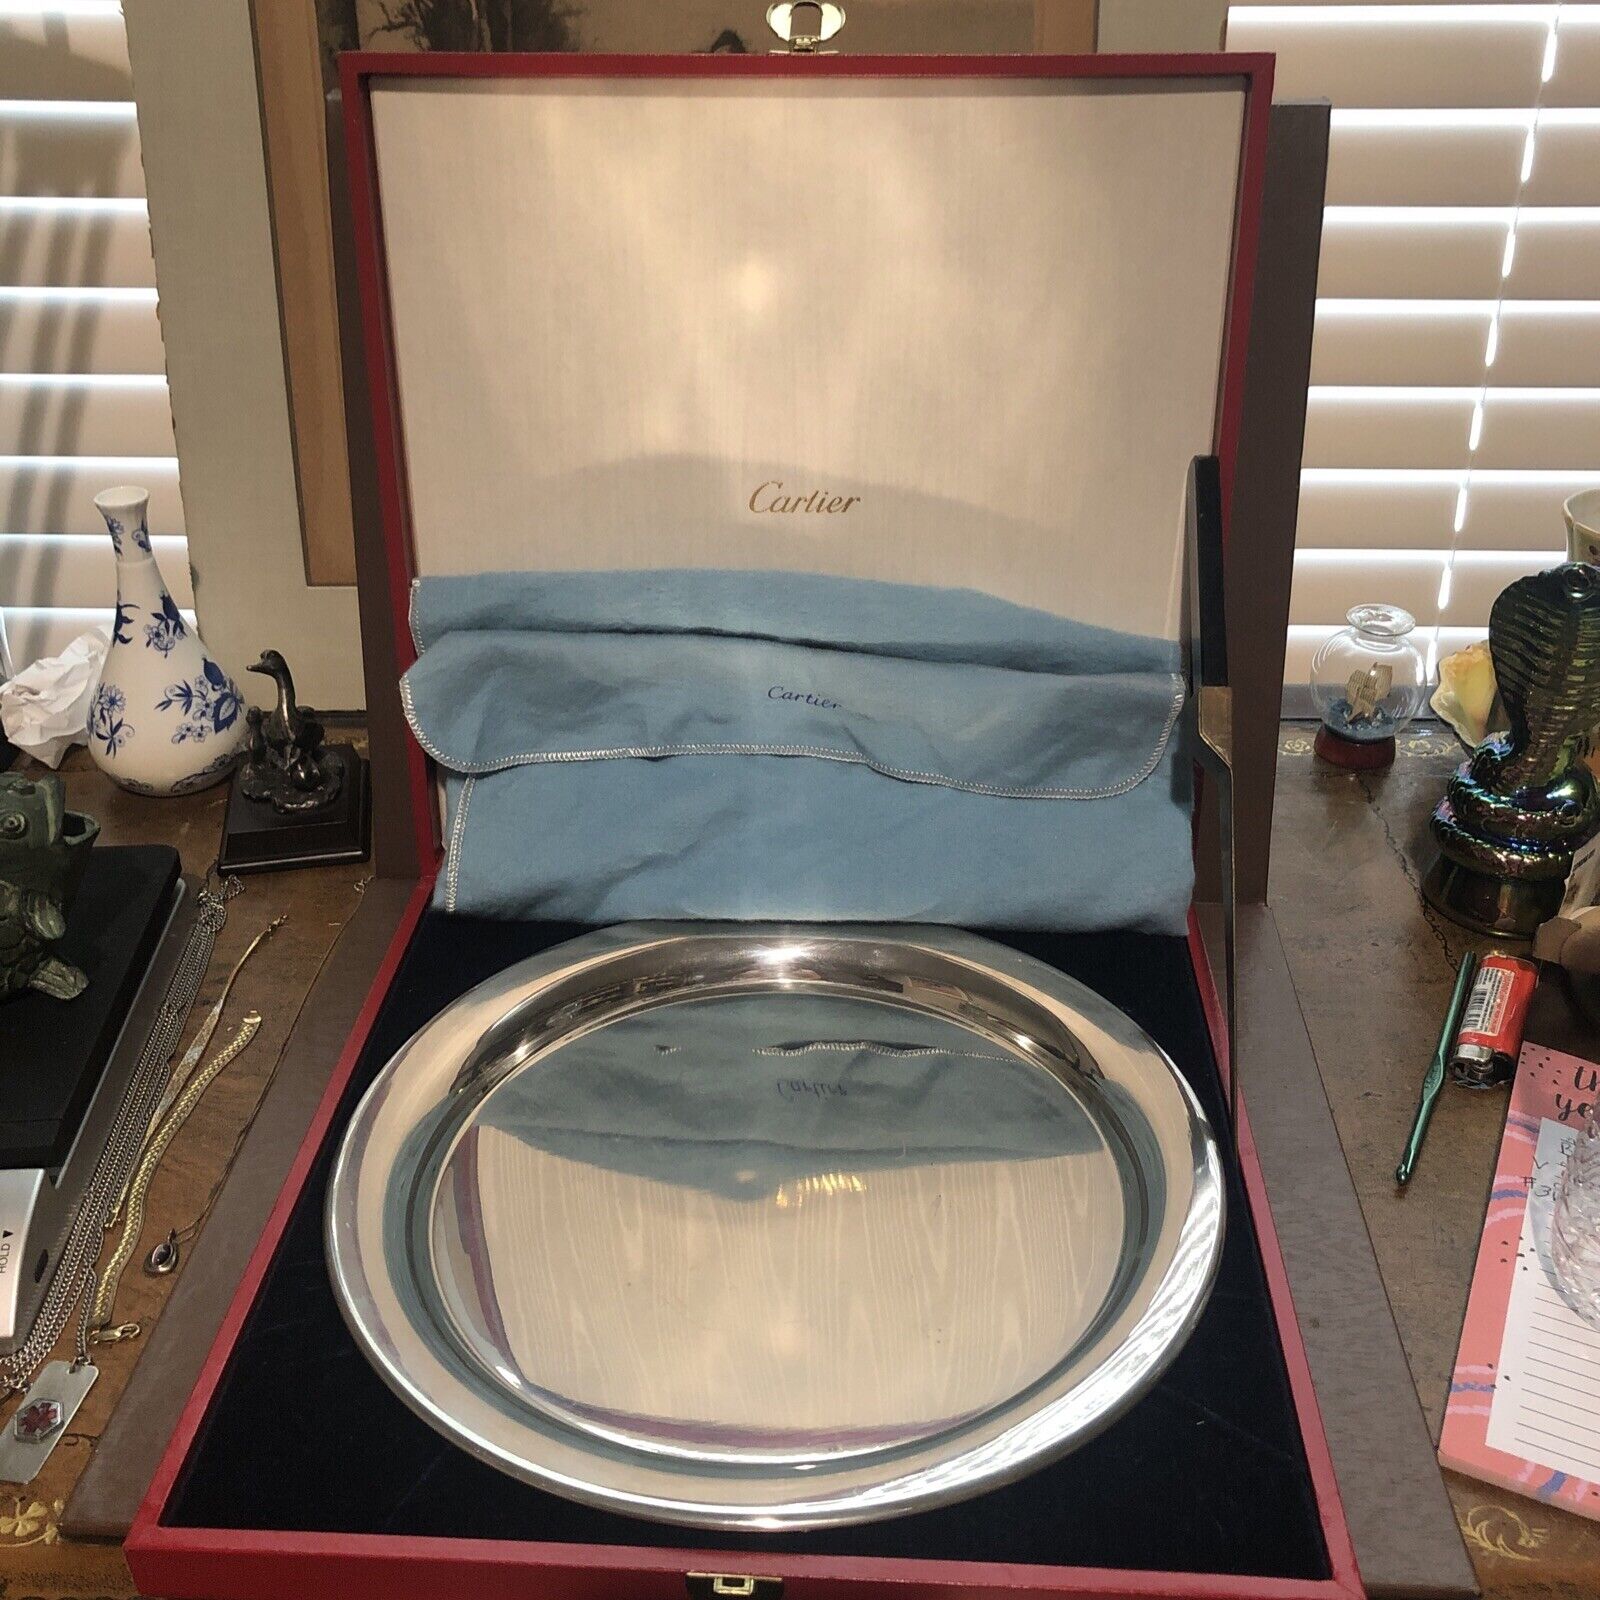 Cartier pewter vintage plate with original red box and blue dust bag vintage 